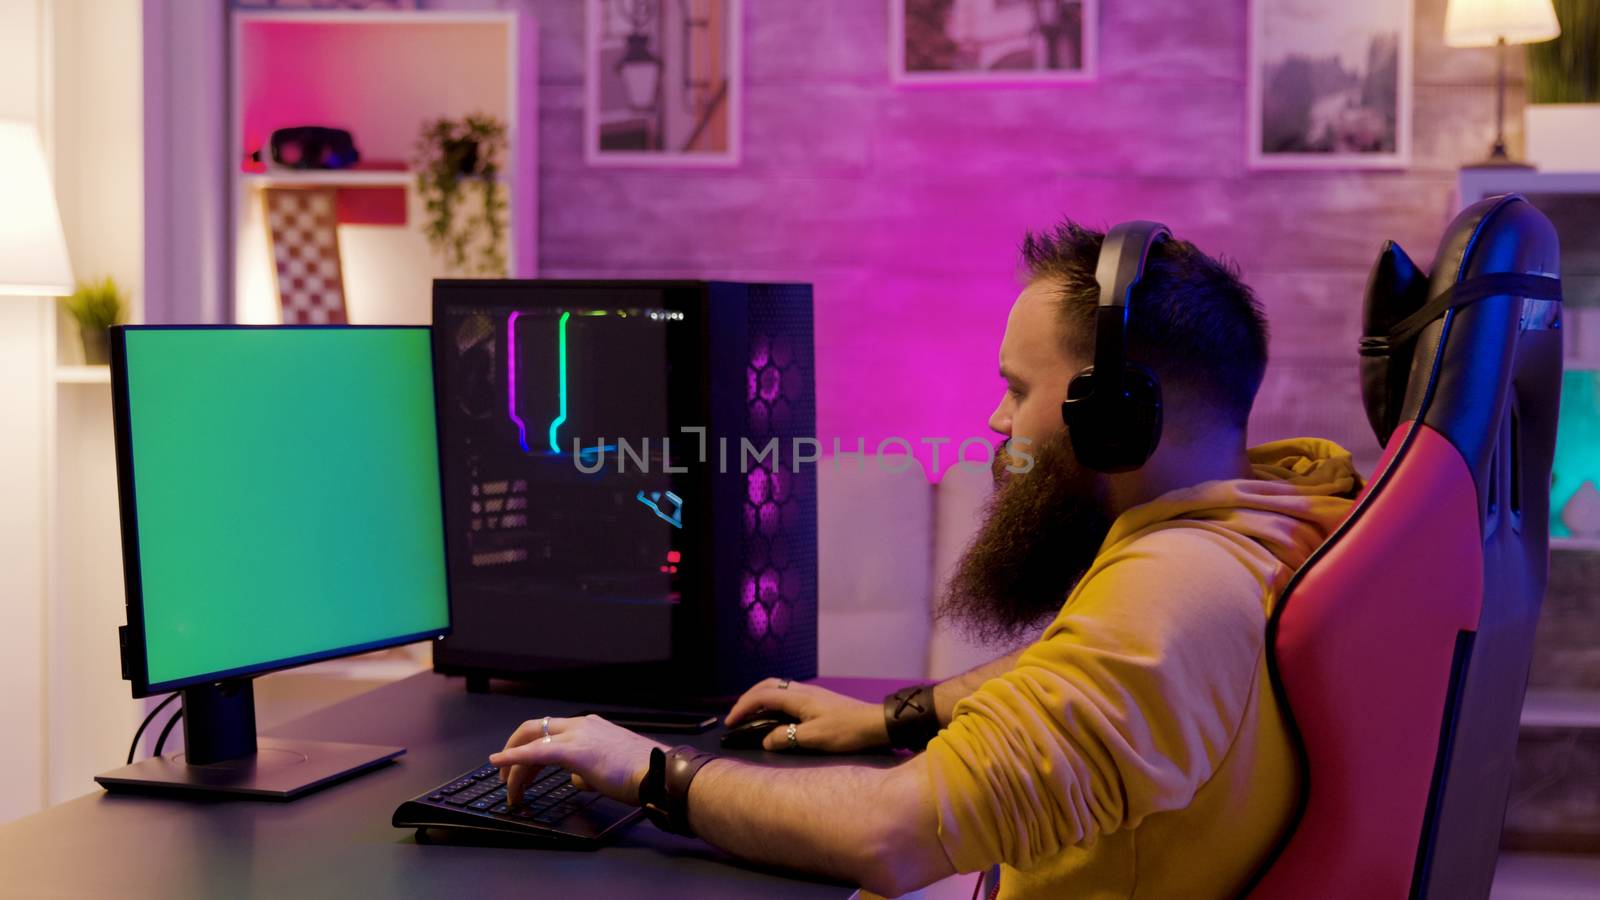 Man playing on powerfull gaming pc in a room with neon lights. Computer with green screen.